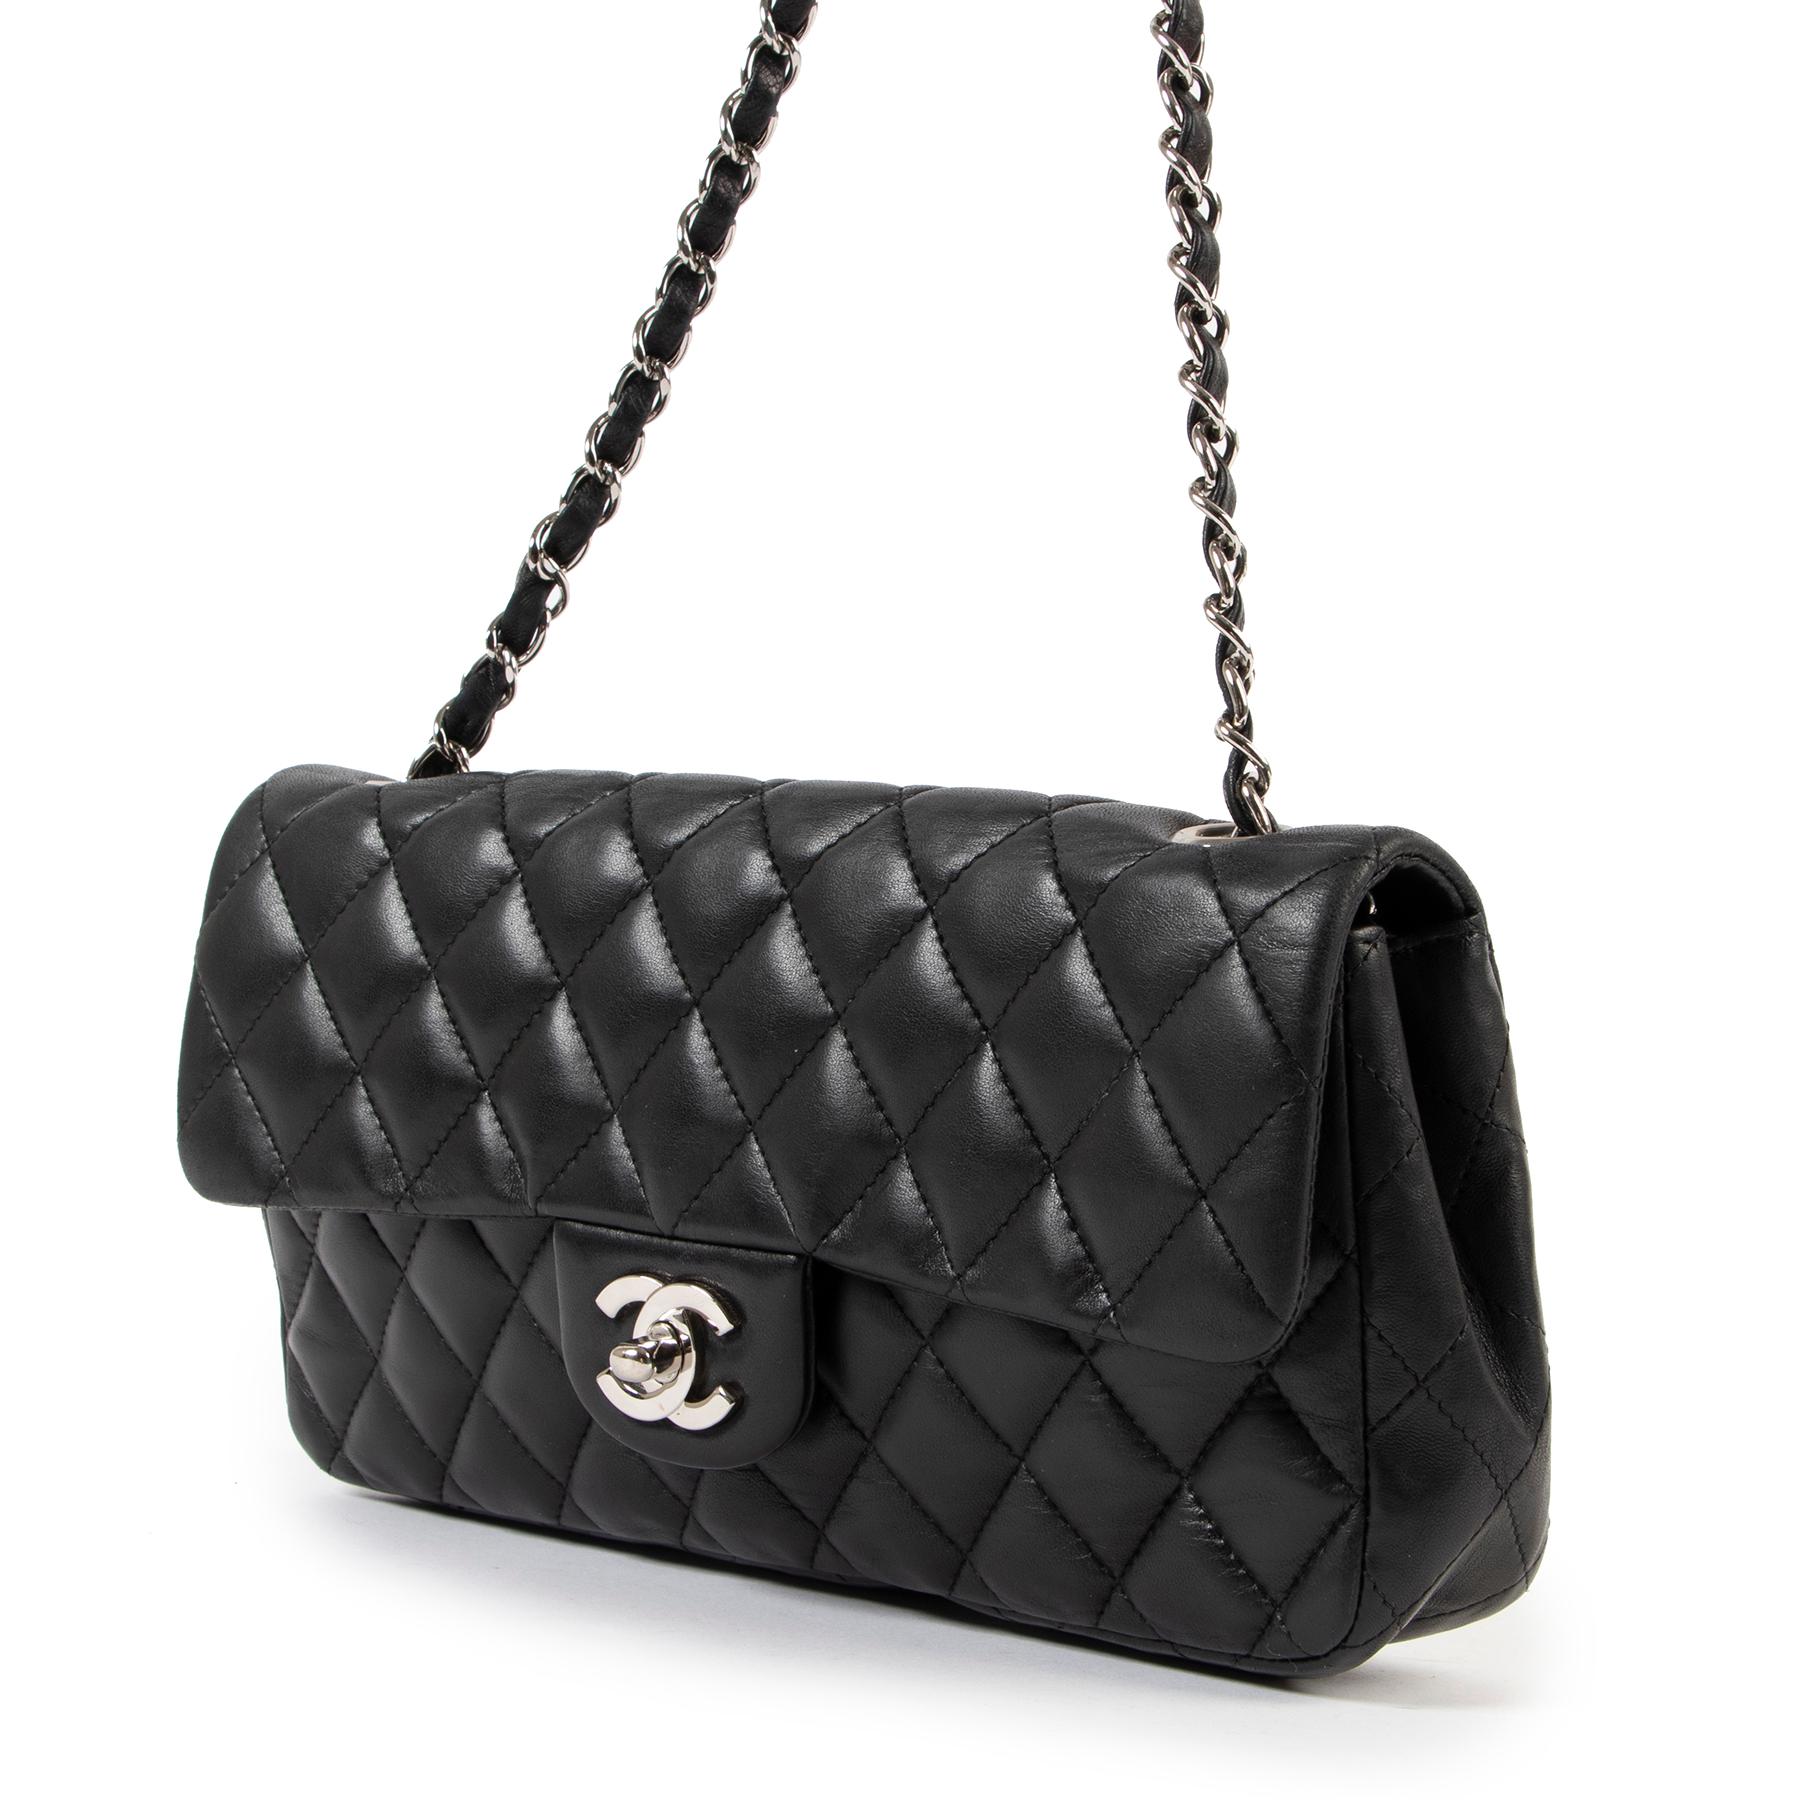 Crafted from signature diamond-quilted lambskin, this Chanel East West flap shoulder bag displays the expert craftsmanship the maison stands for. This iteration boasts timeless black color and is finished with the iconic interlocking CC turnlock in